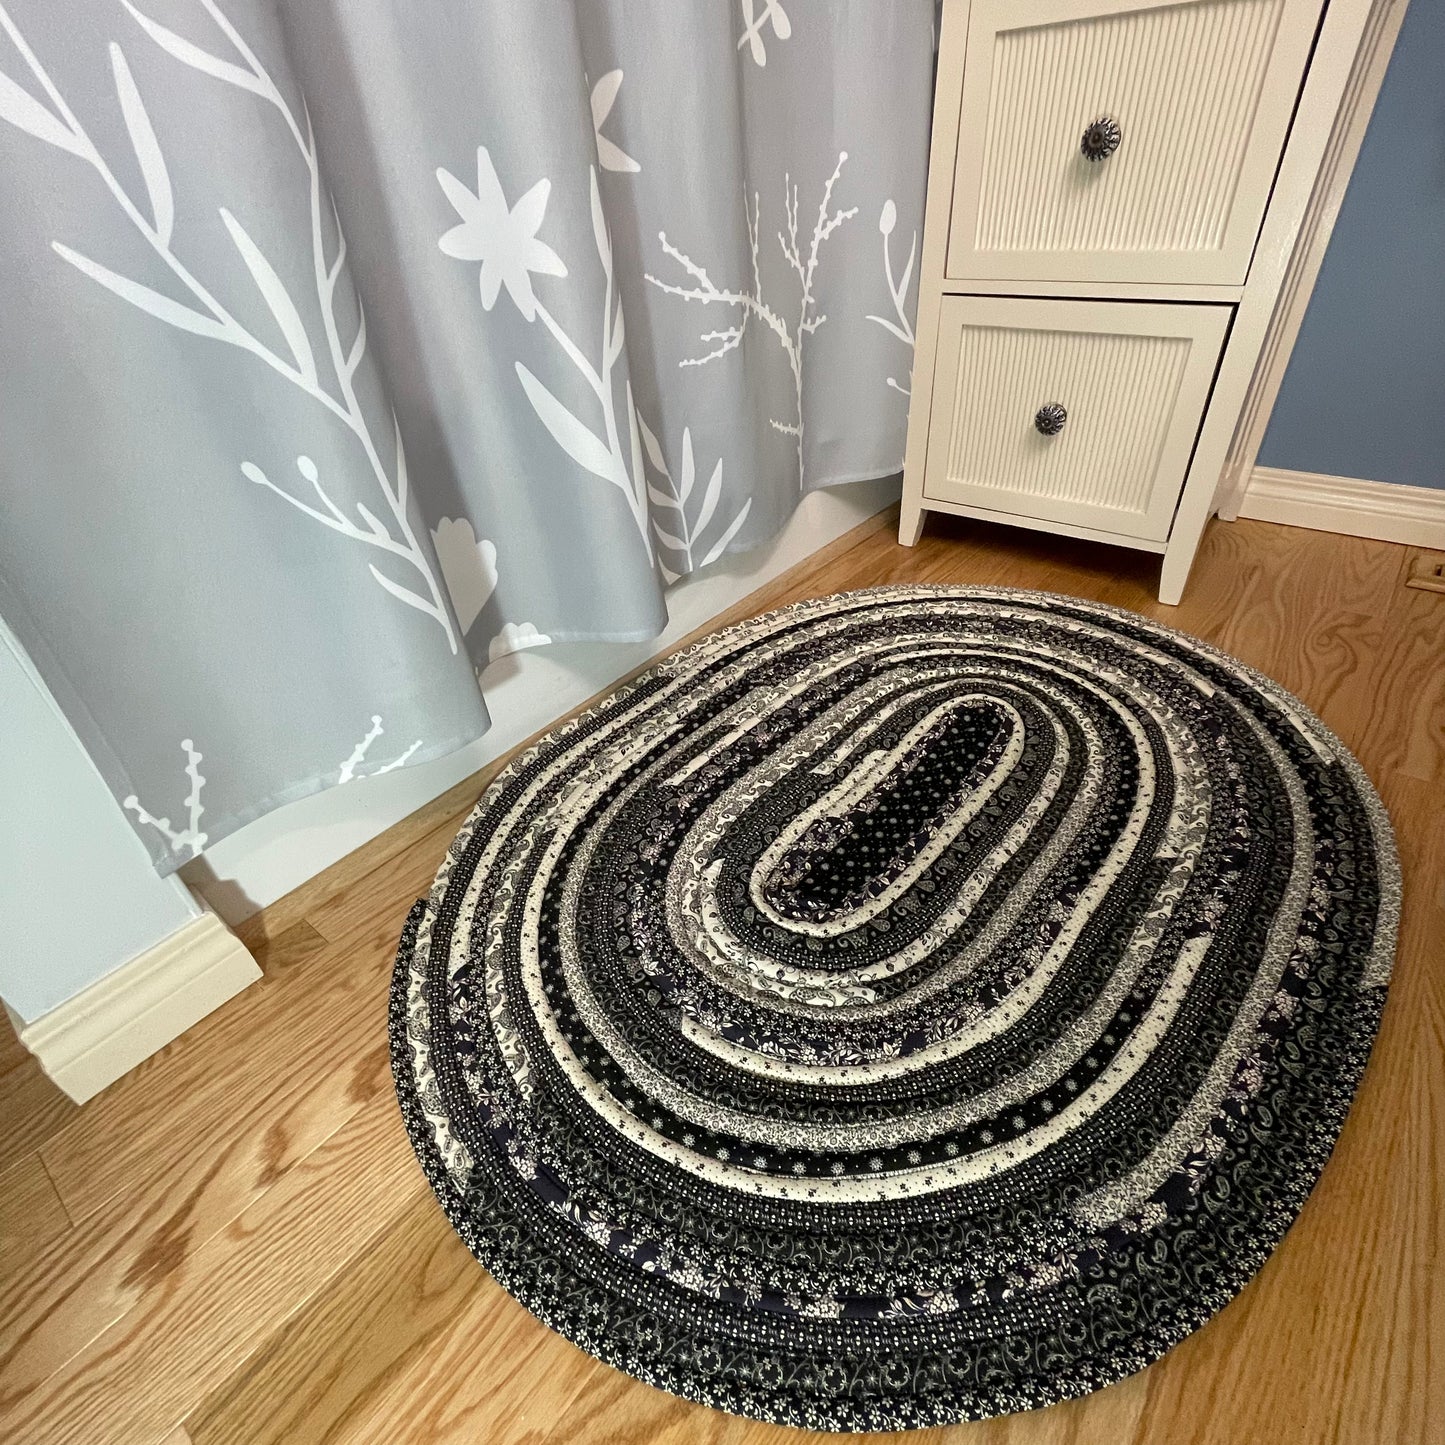 Black and Cream Kitchen Accent Rug Washable Cotton Rug For Bedside or Bathroom